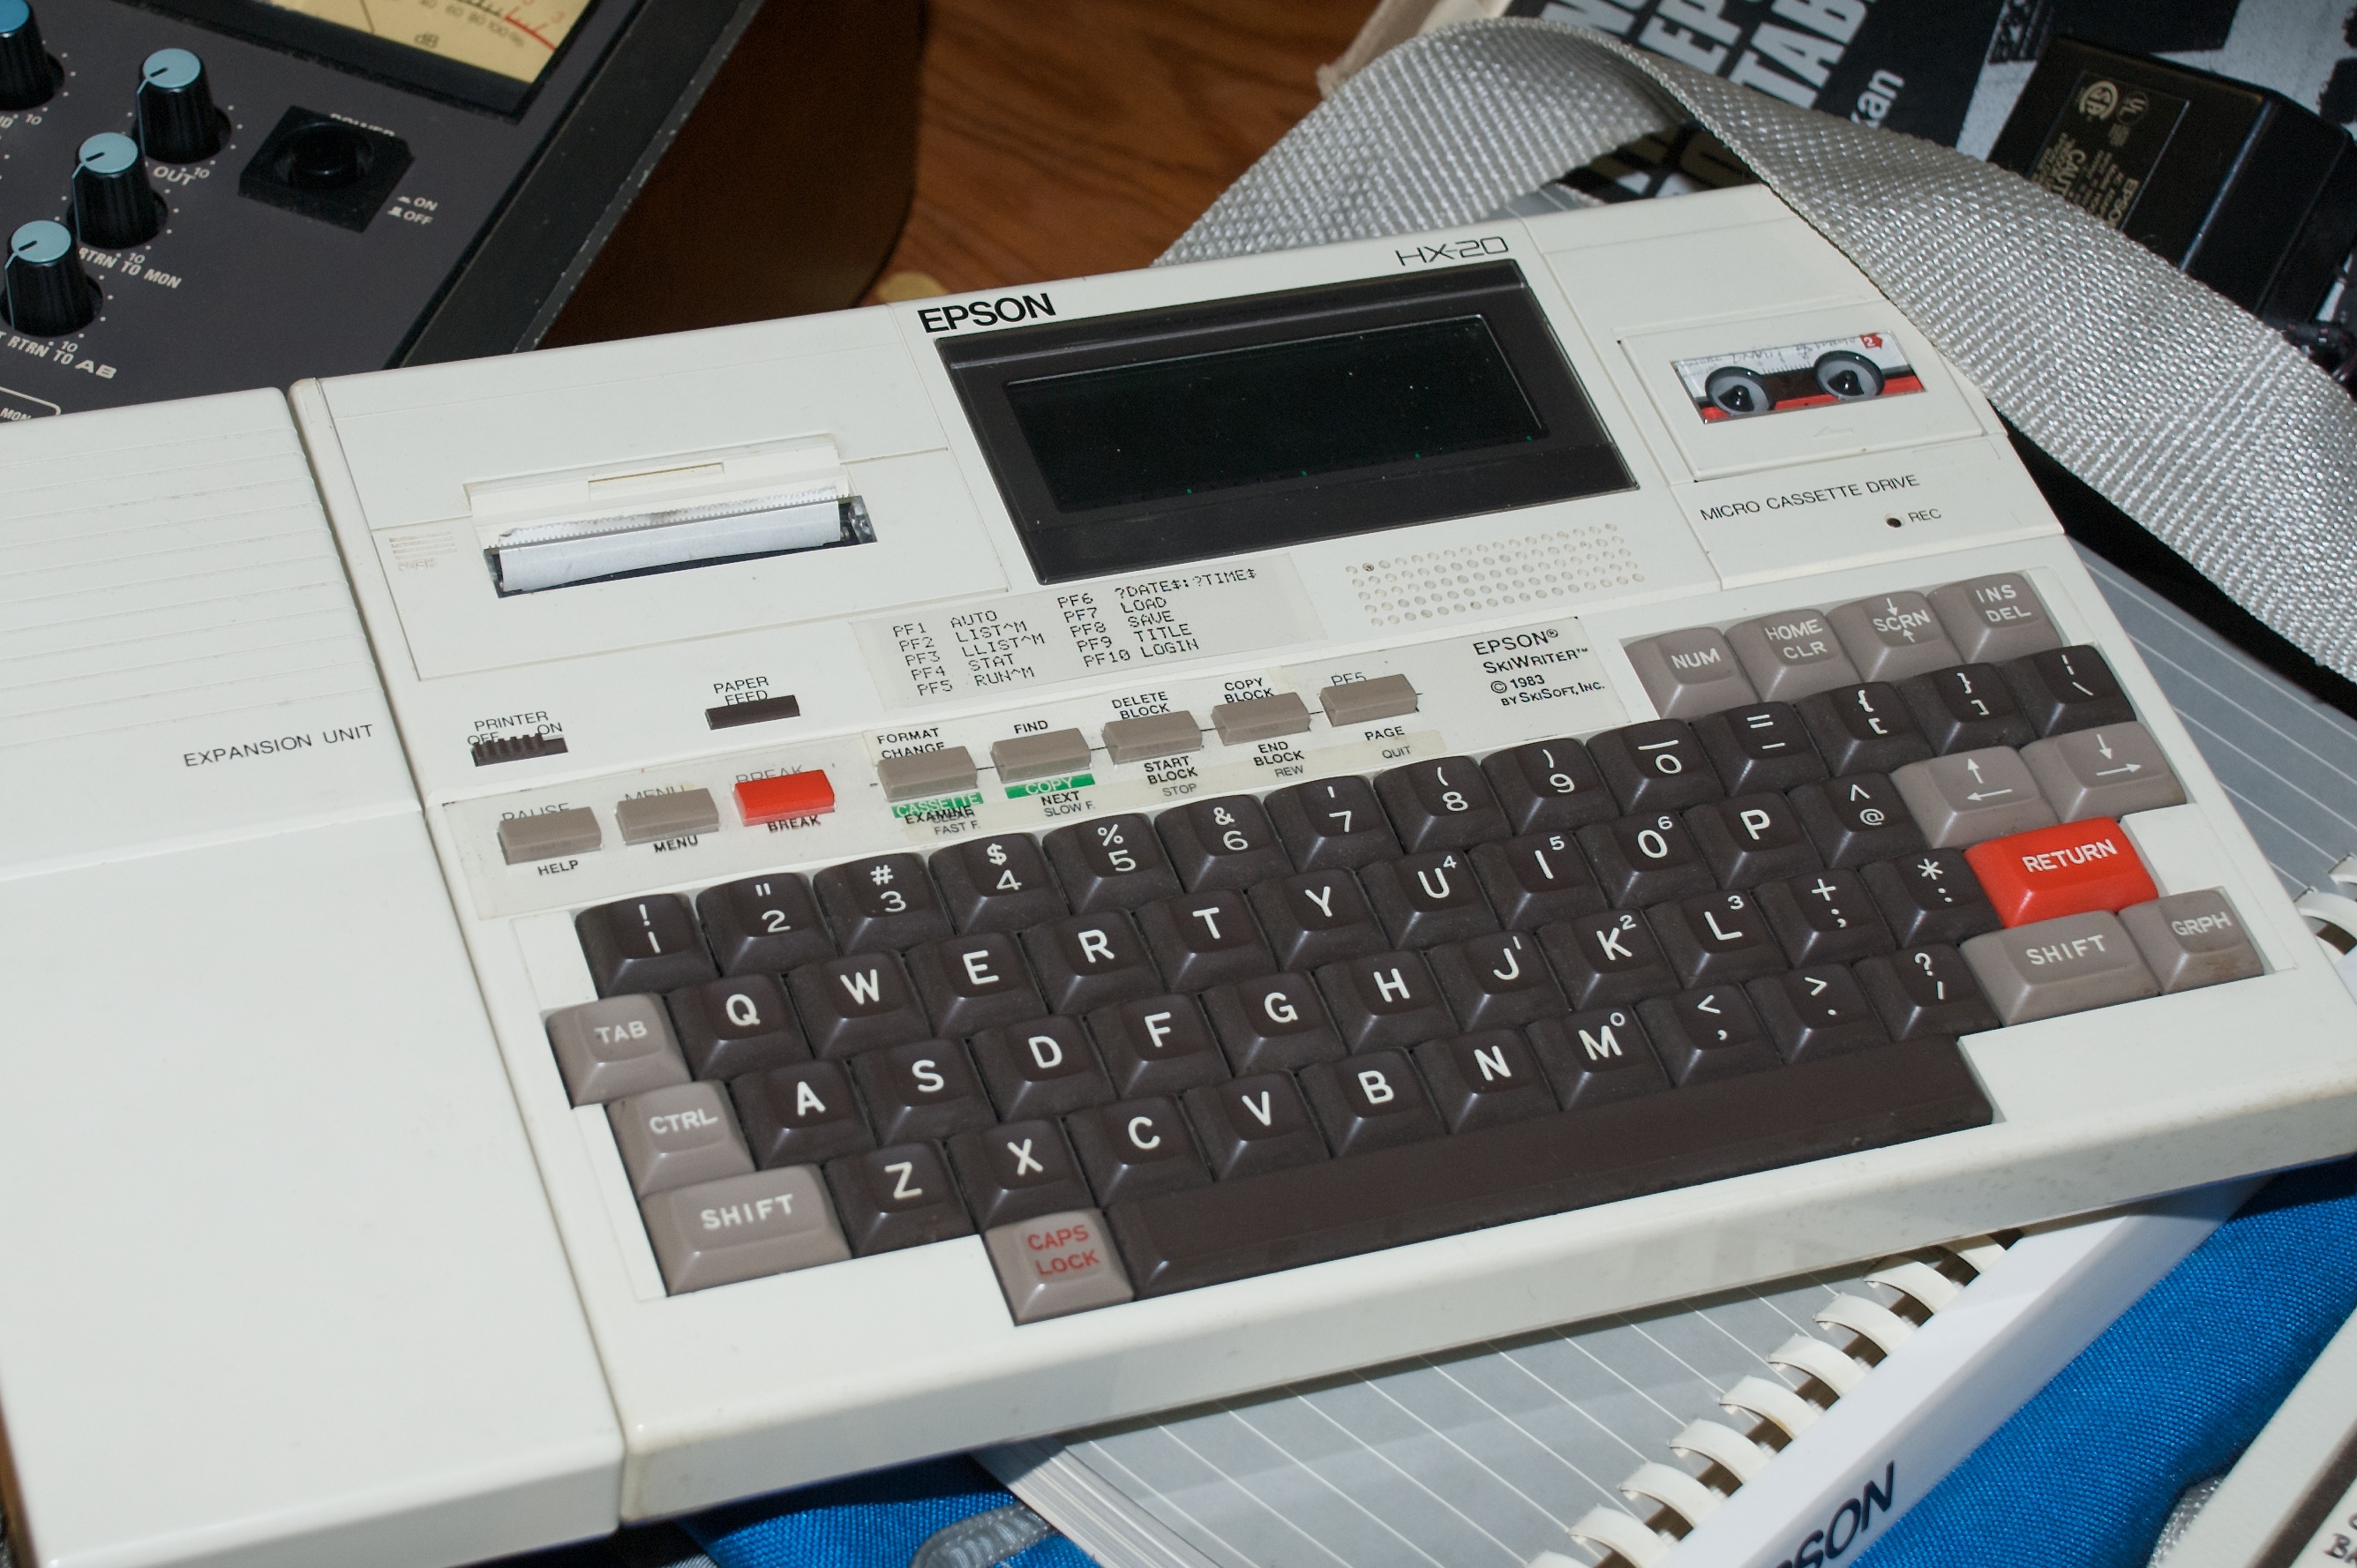 The Epson HX-20. A classic example of early notebooks...the 